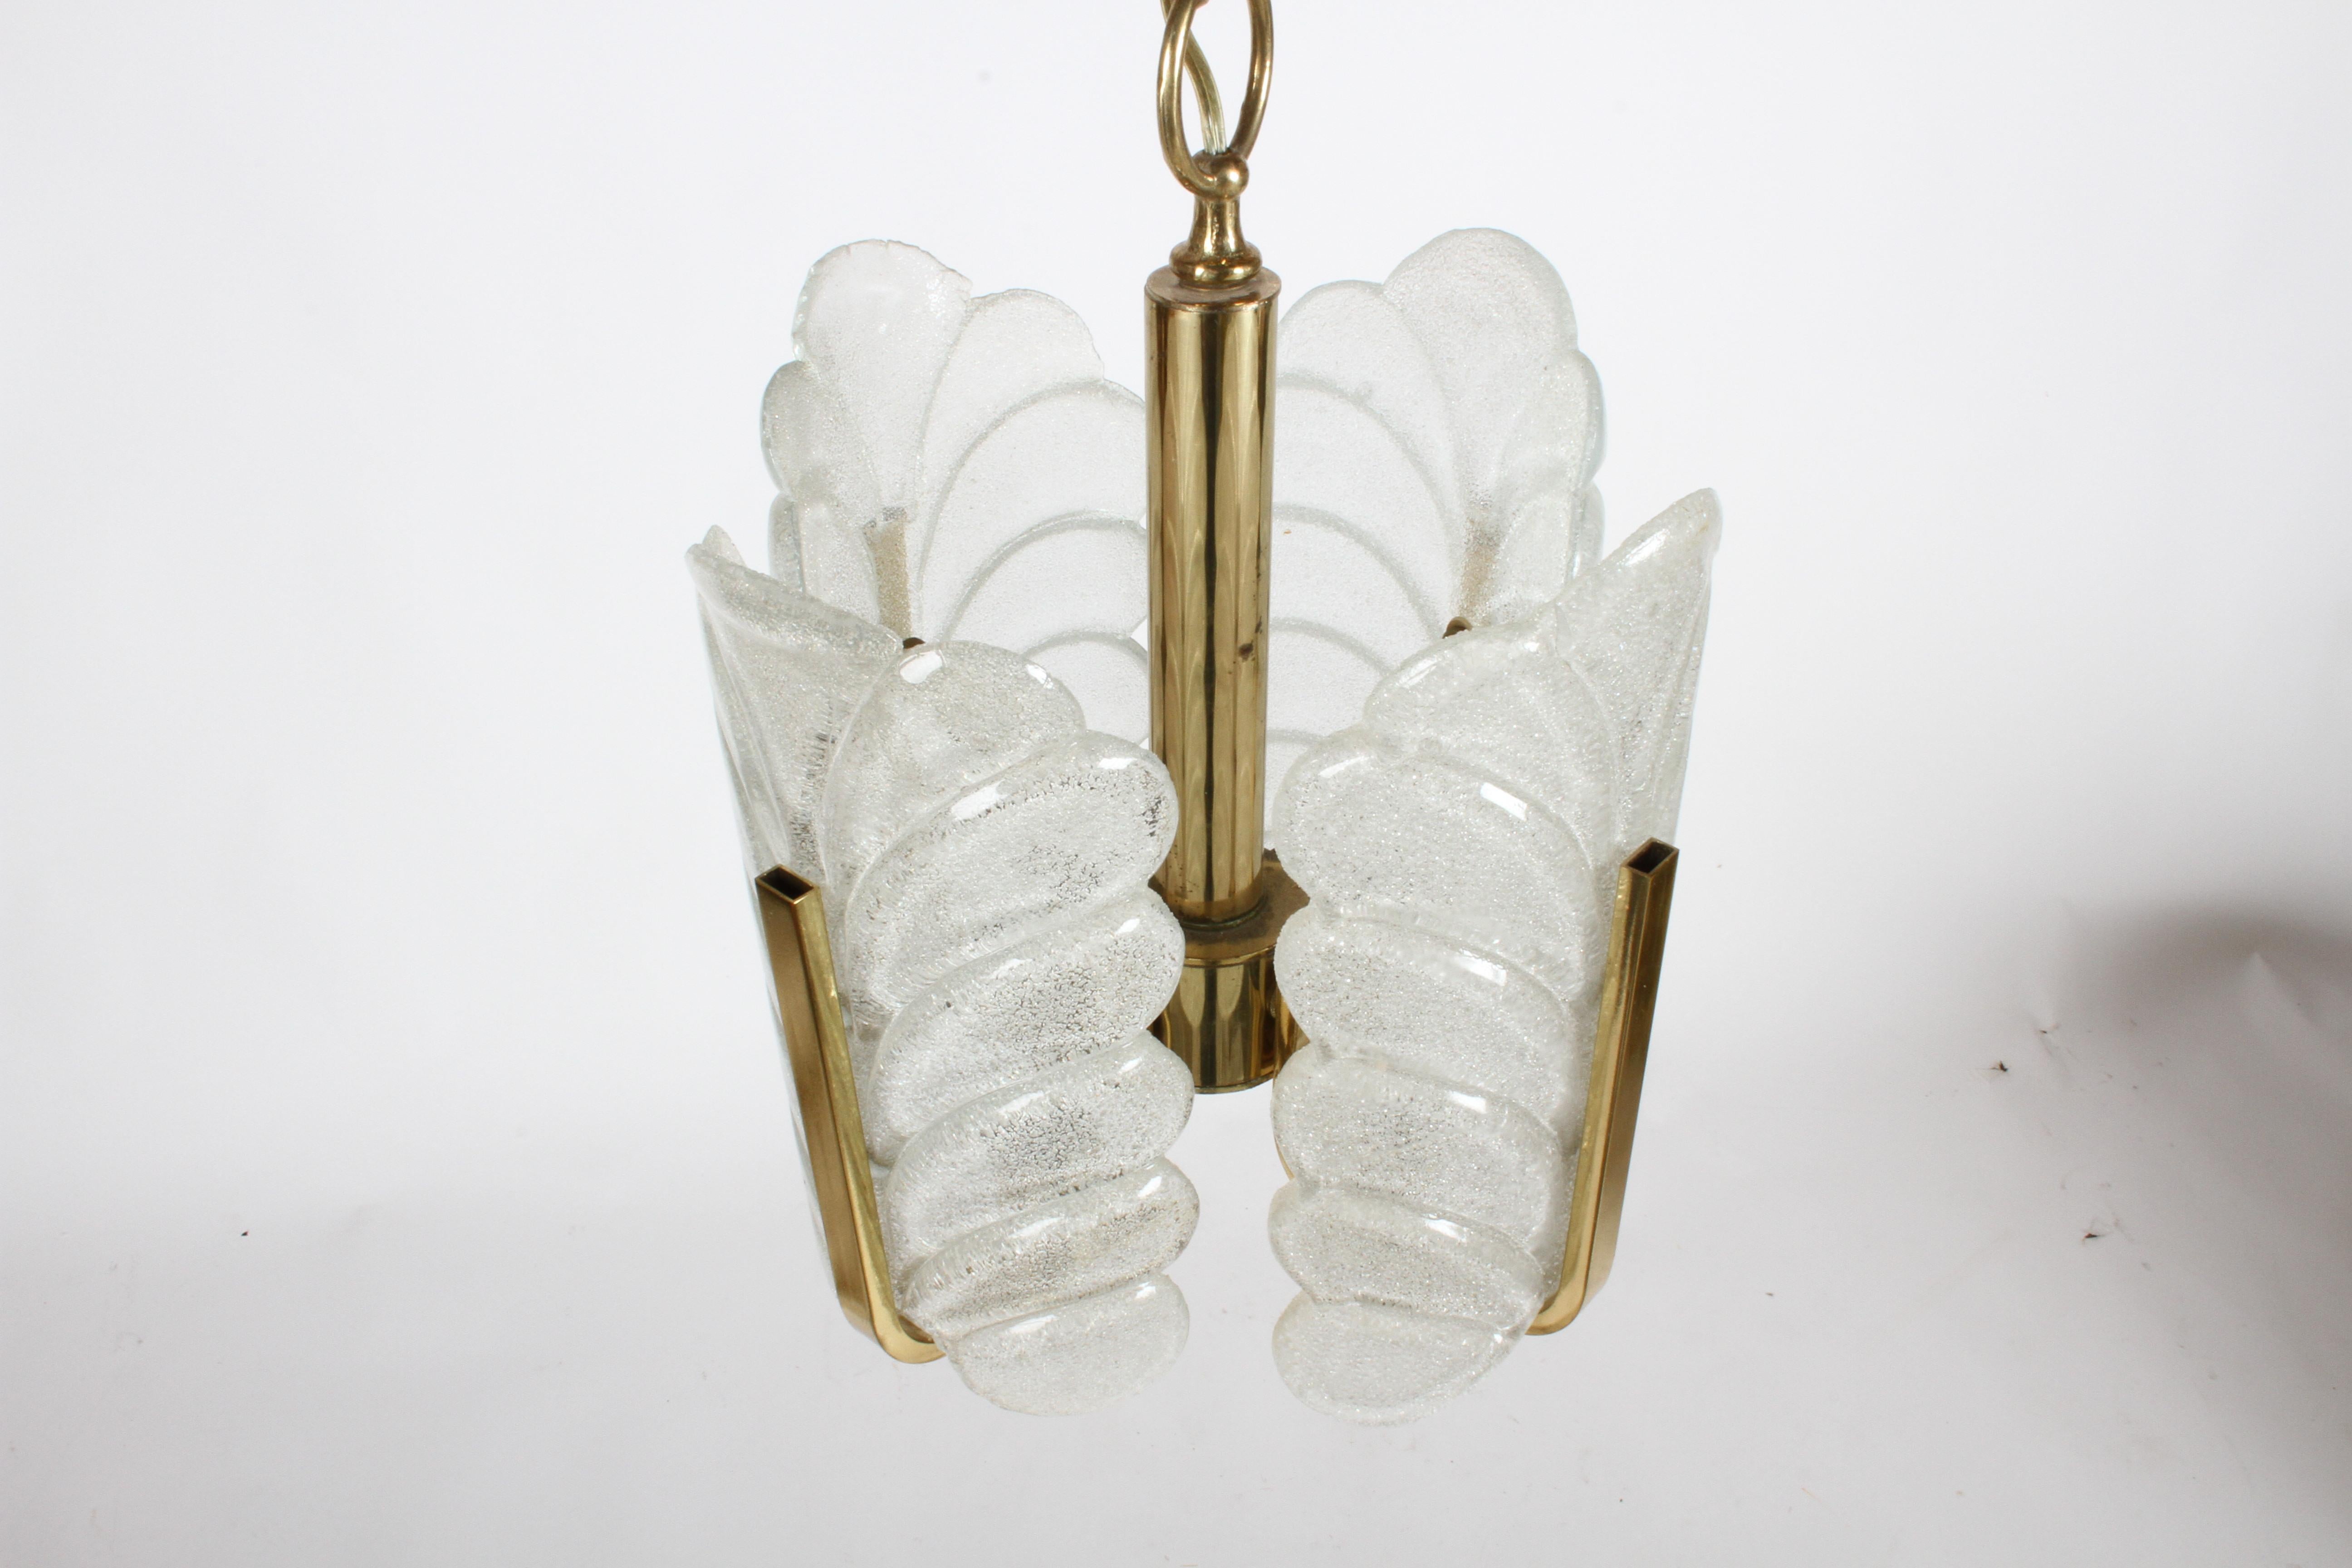 Mid-20th Century Carl Fagerlund Chandelier for Orrefors Sweden Textured Acanthus Glass Leaves  For Sale